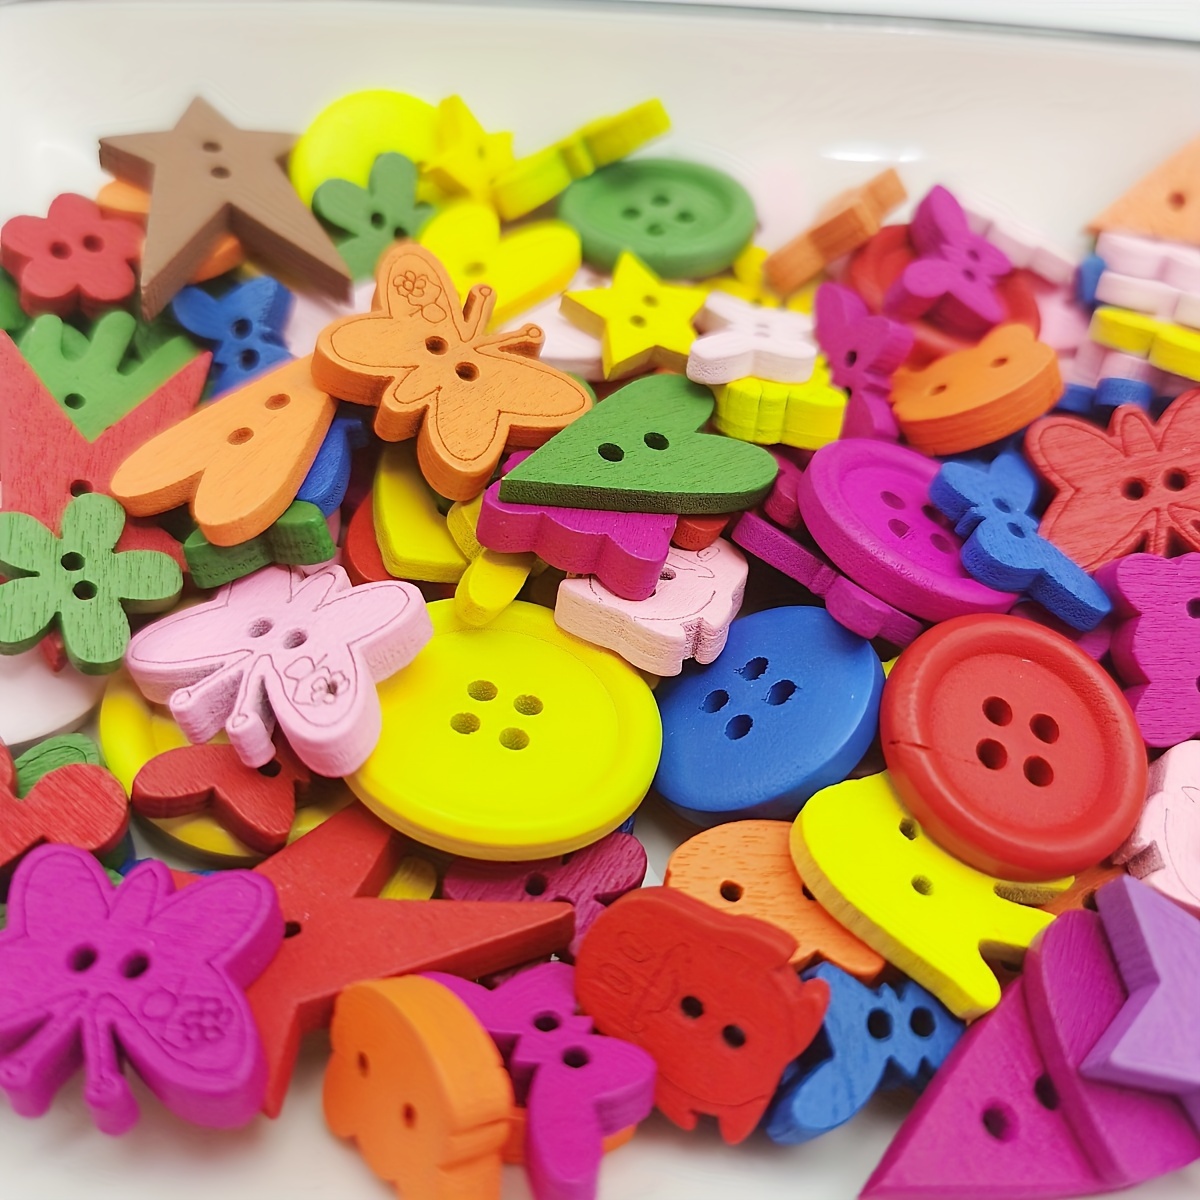 200PCS 2-Hole Heart-Shaped Wooden Buttons Decorative Buttons for Sewing  Scrapbooking Crafts 